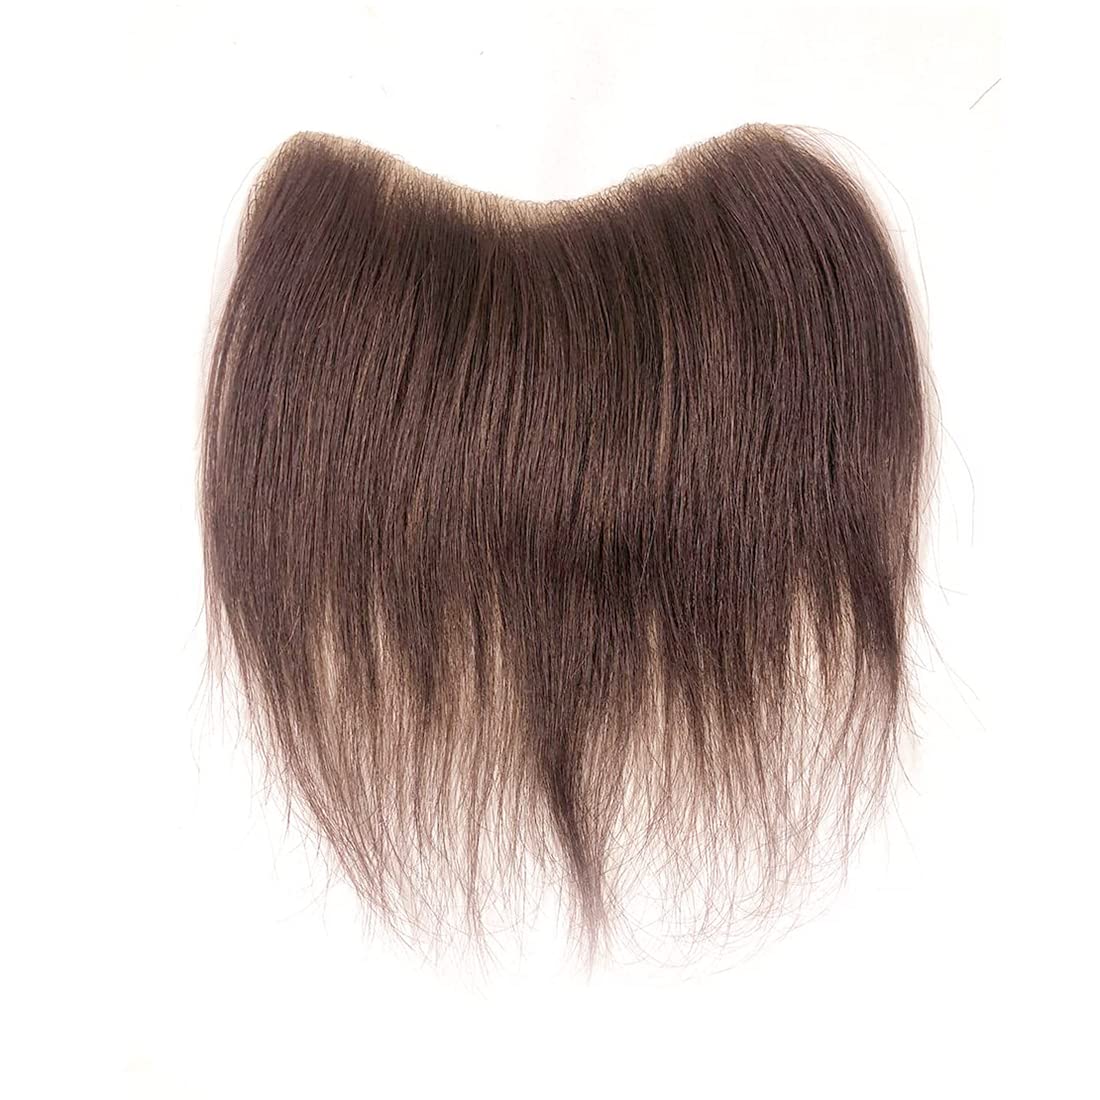 Human Hair Frontal Hairpiece for Women Hairline Forehead